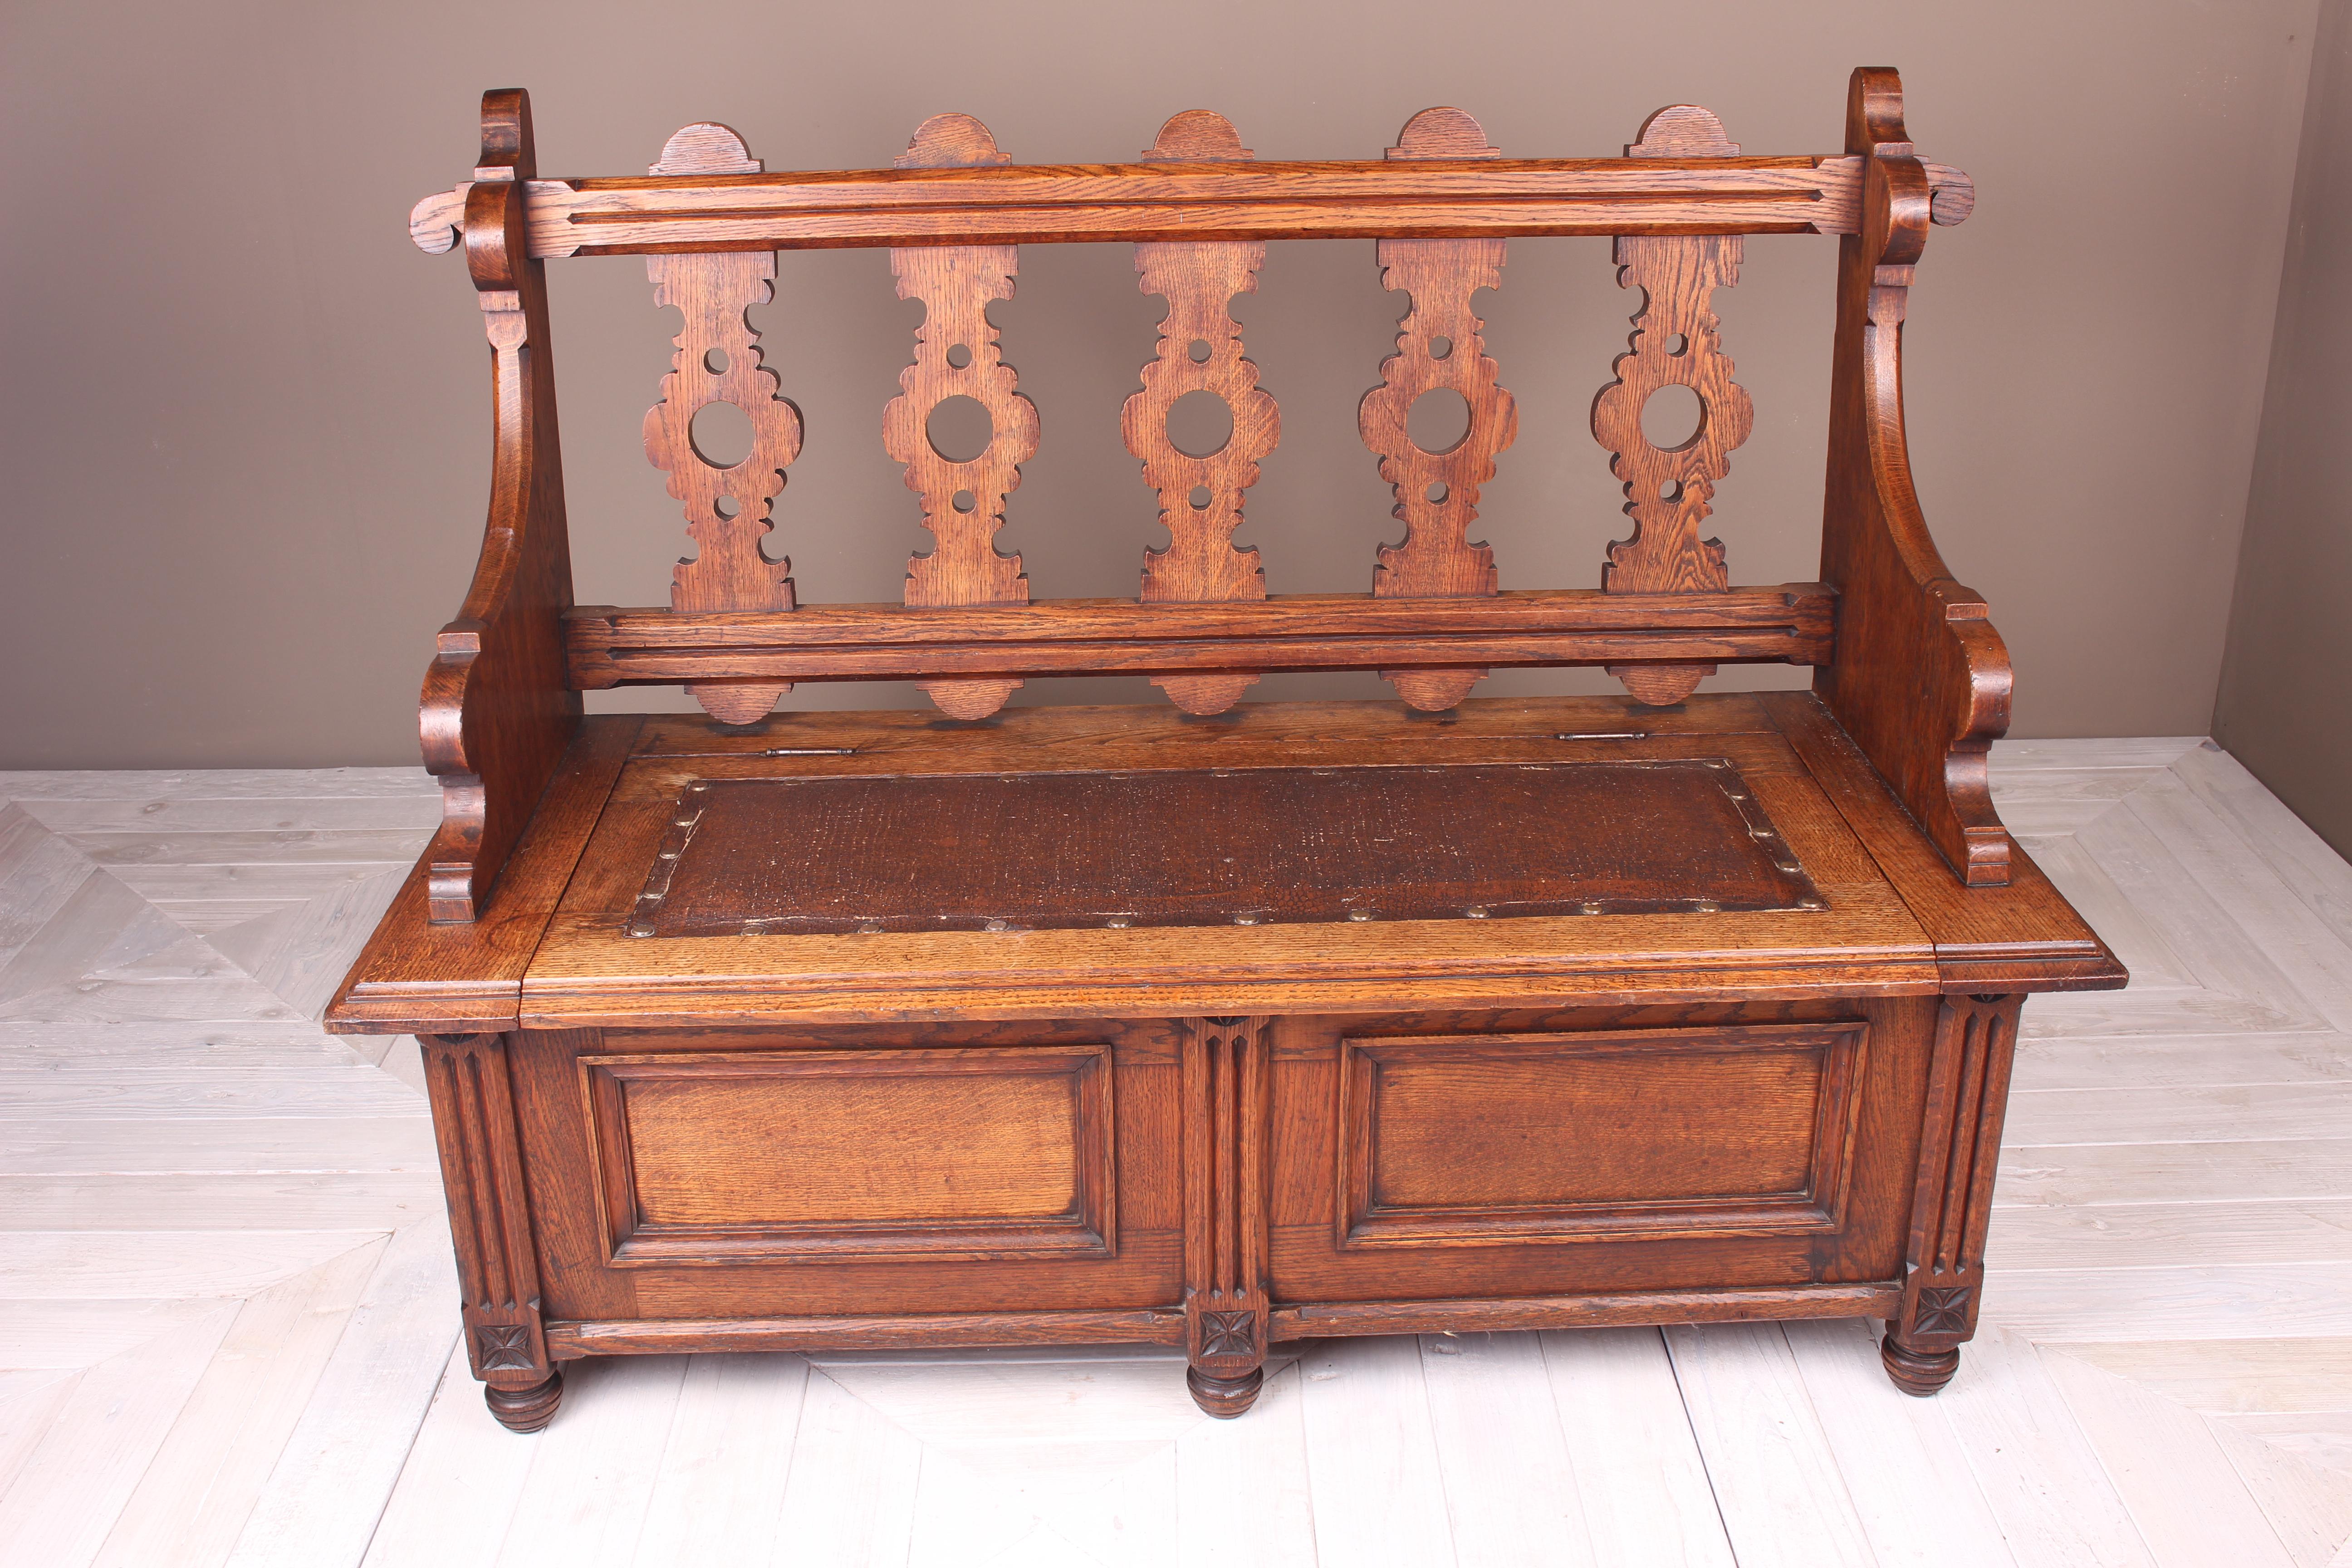 An attractive Arts and Crafts oak hall seat or settle. Having a box base with studded leather seat and pierced splats to the back. The front section with adjacent fielded panels separated by three fluted columns, each having stylized decorative